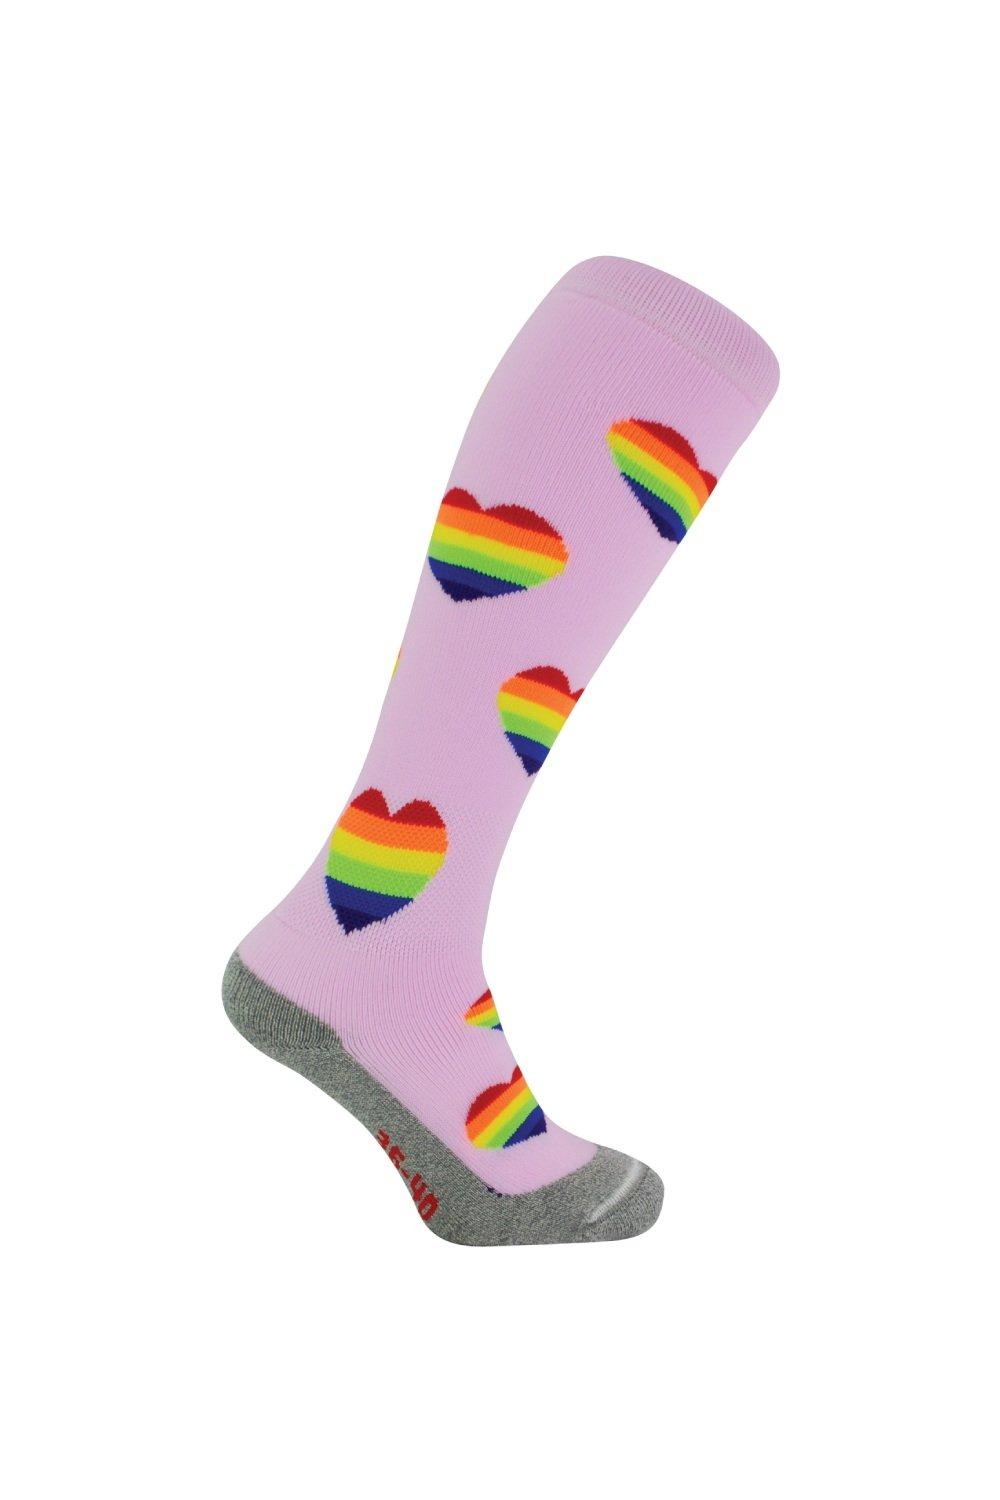 Long Sport Hockey Socks with Colourful Cool Funky Designs